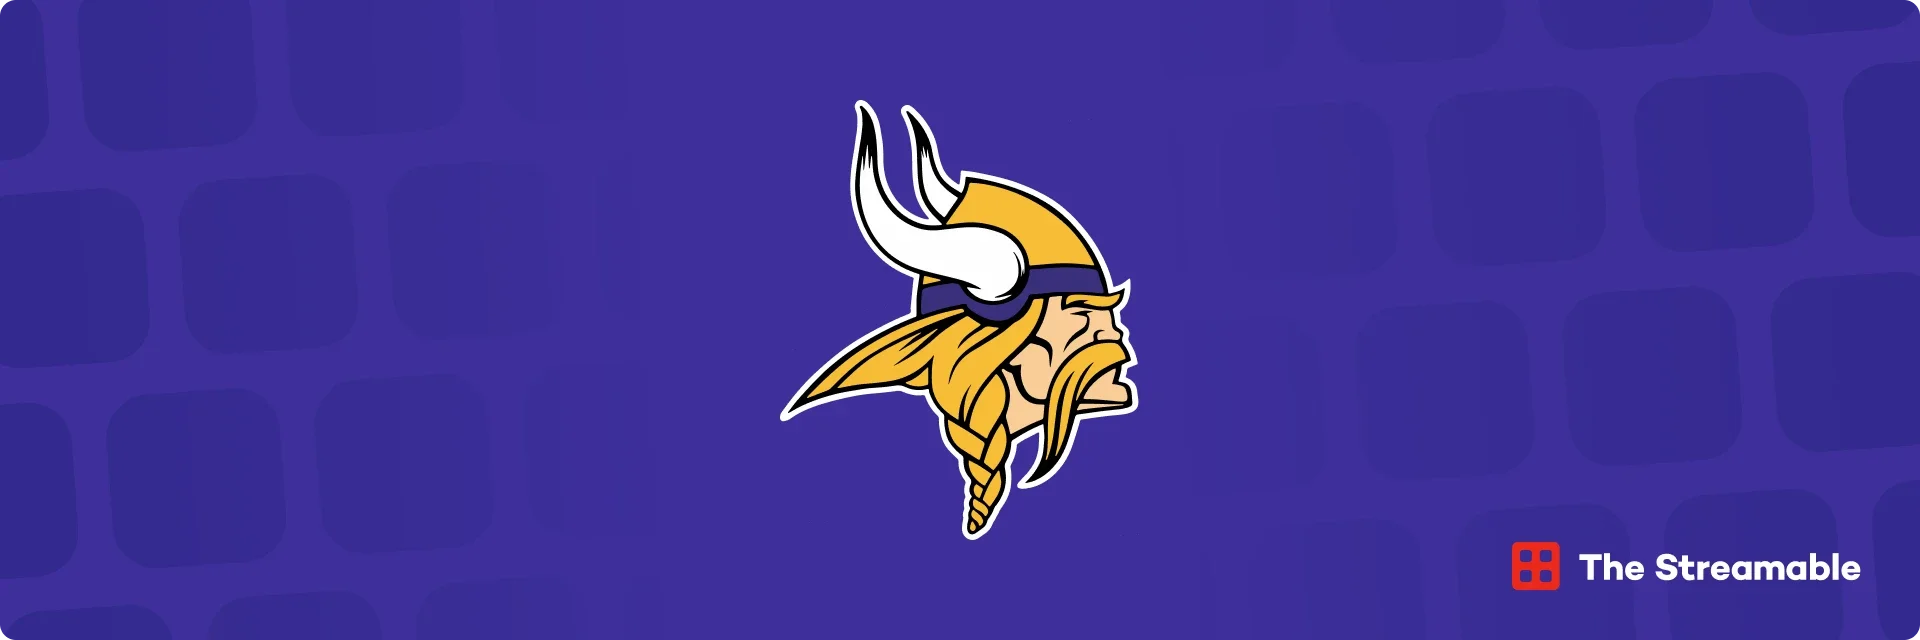 How to Watch Minnesota Vikings Games Online Live Without Cable